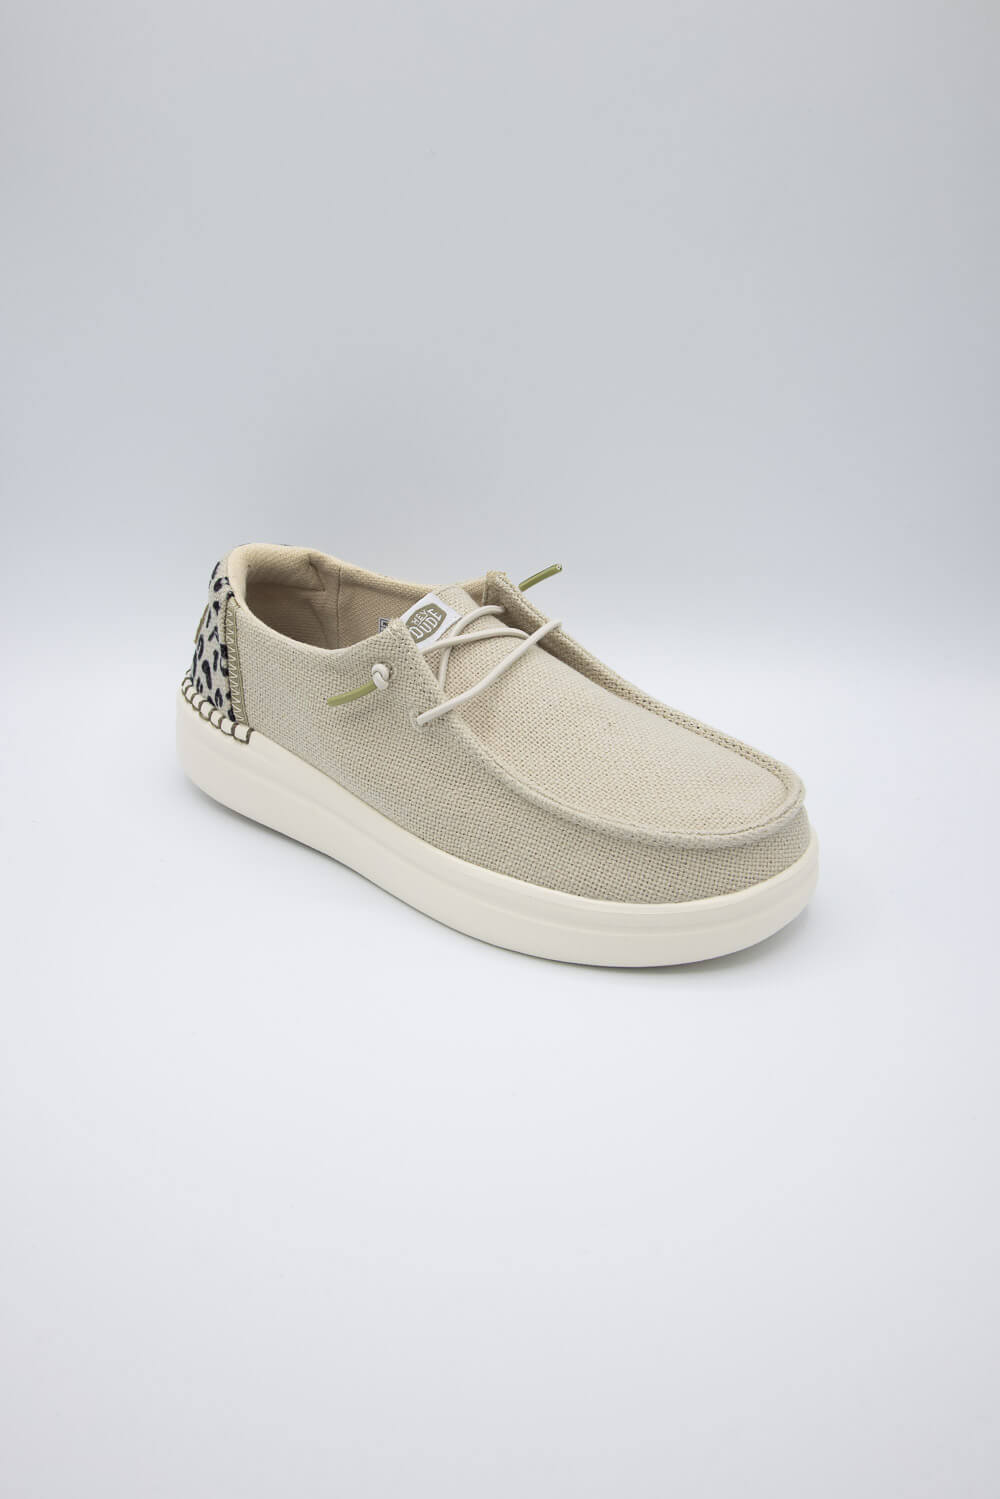 HEYDUDE Women's Wendy Rise Leo Shoes in Cream